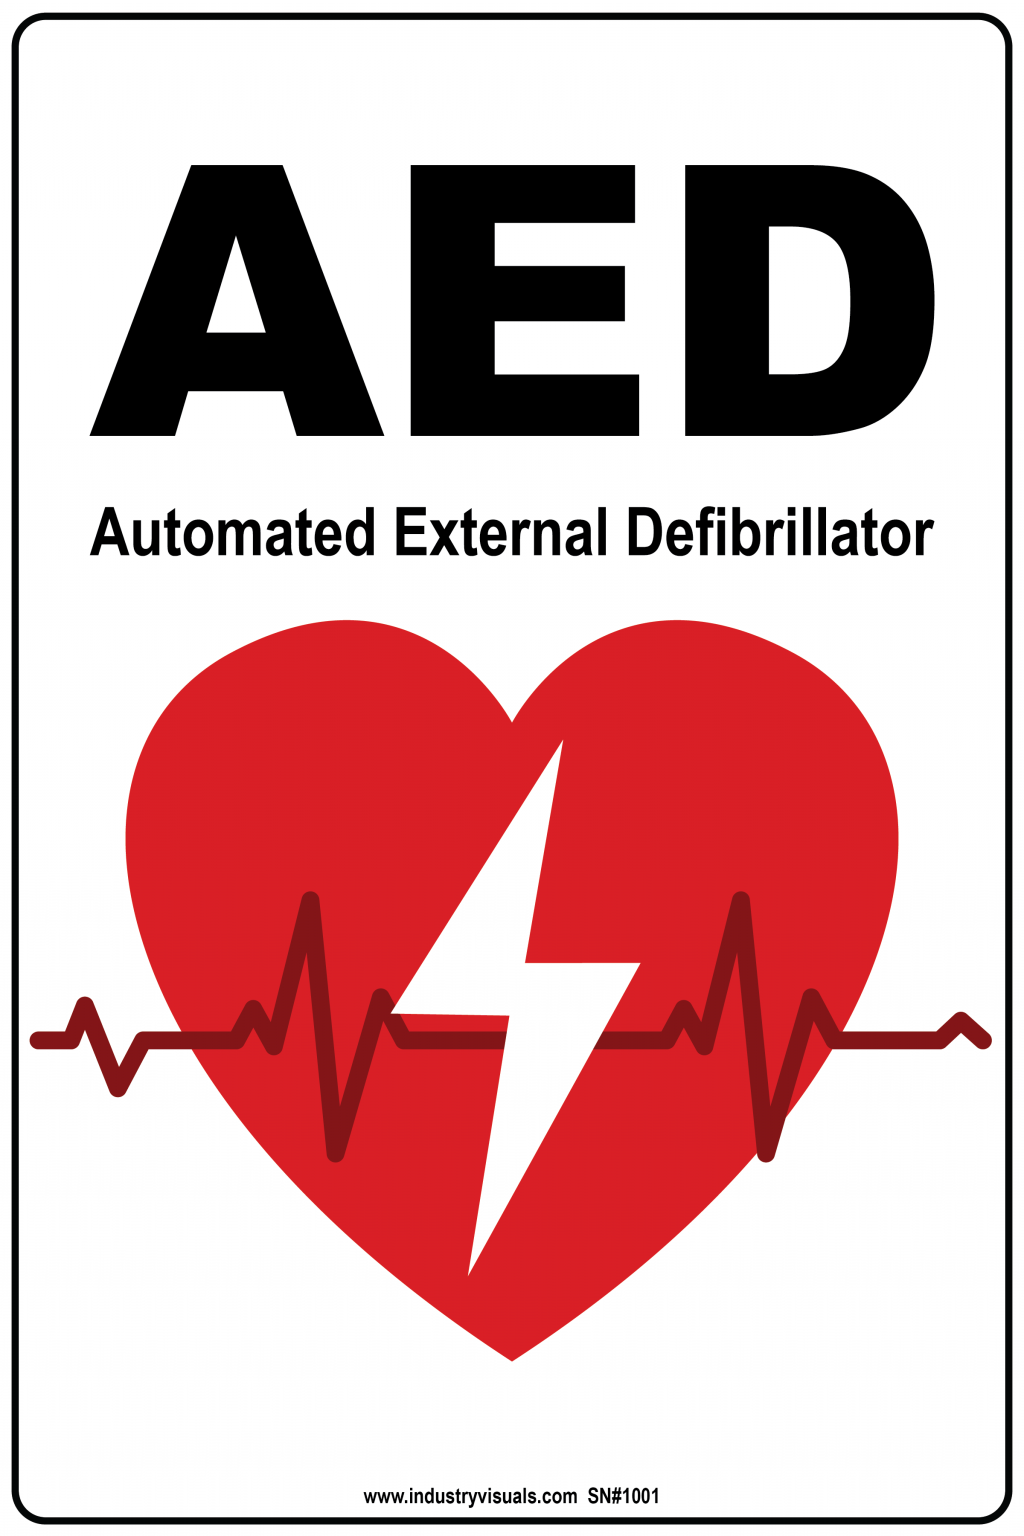 aed-location-sign-industry-visuals